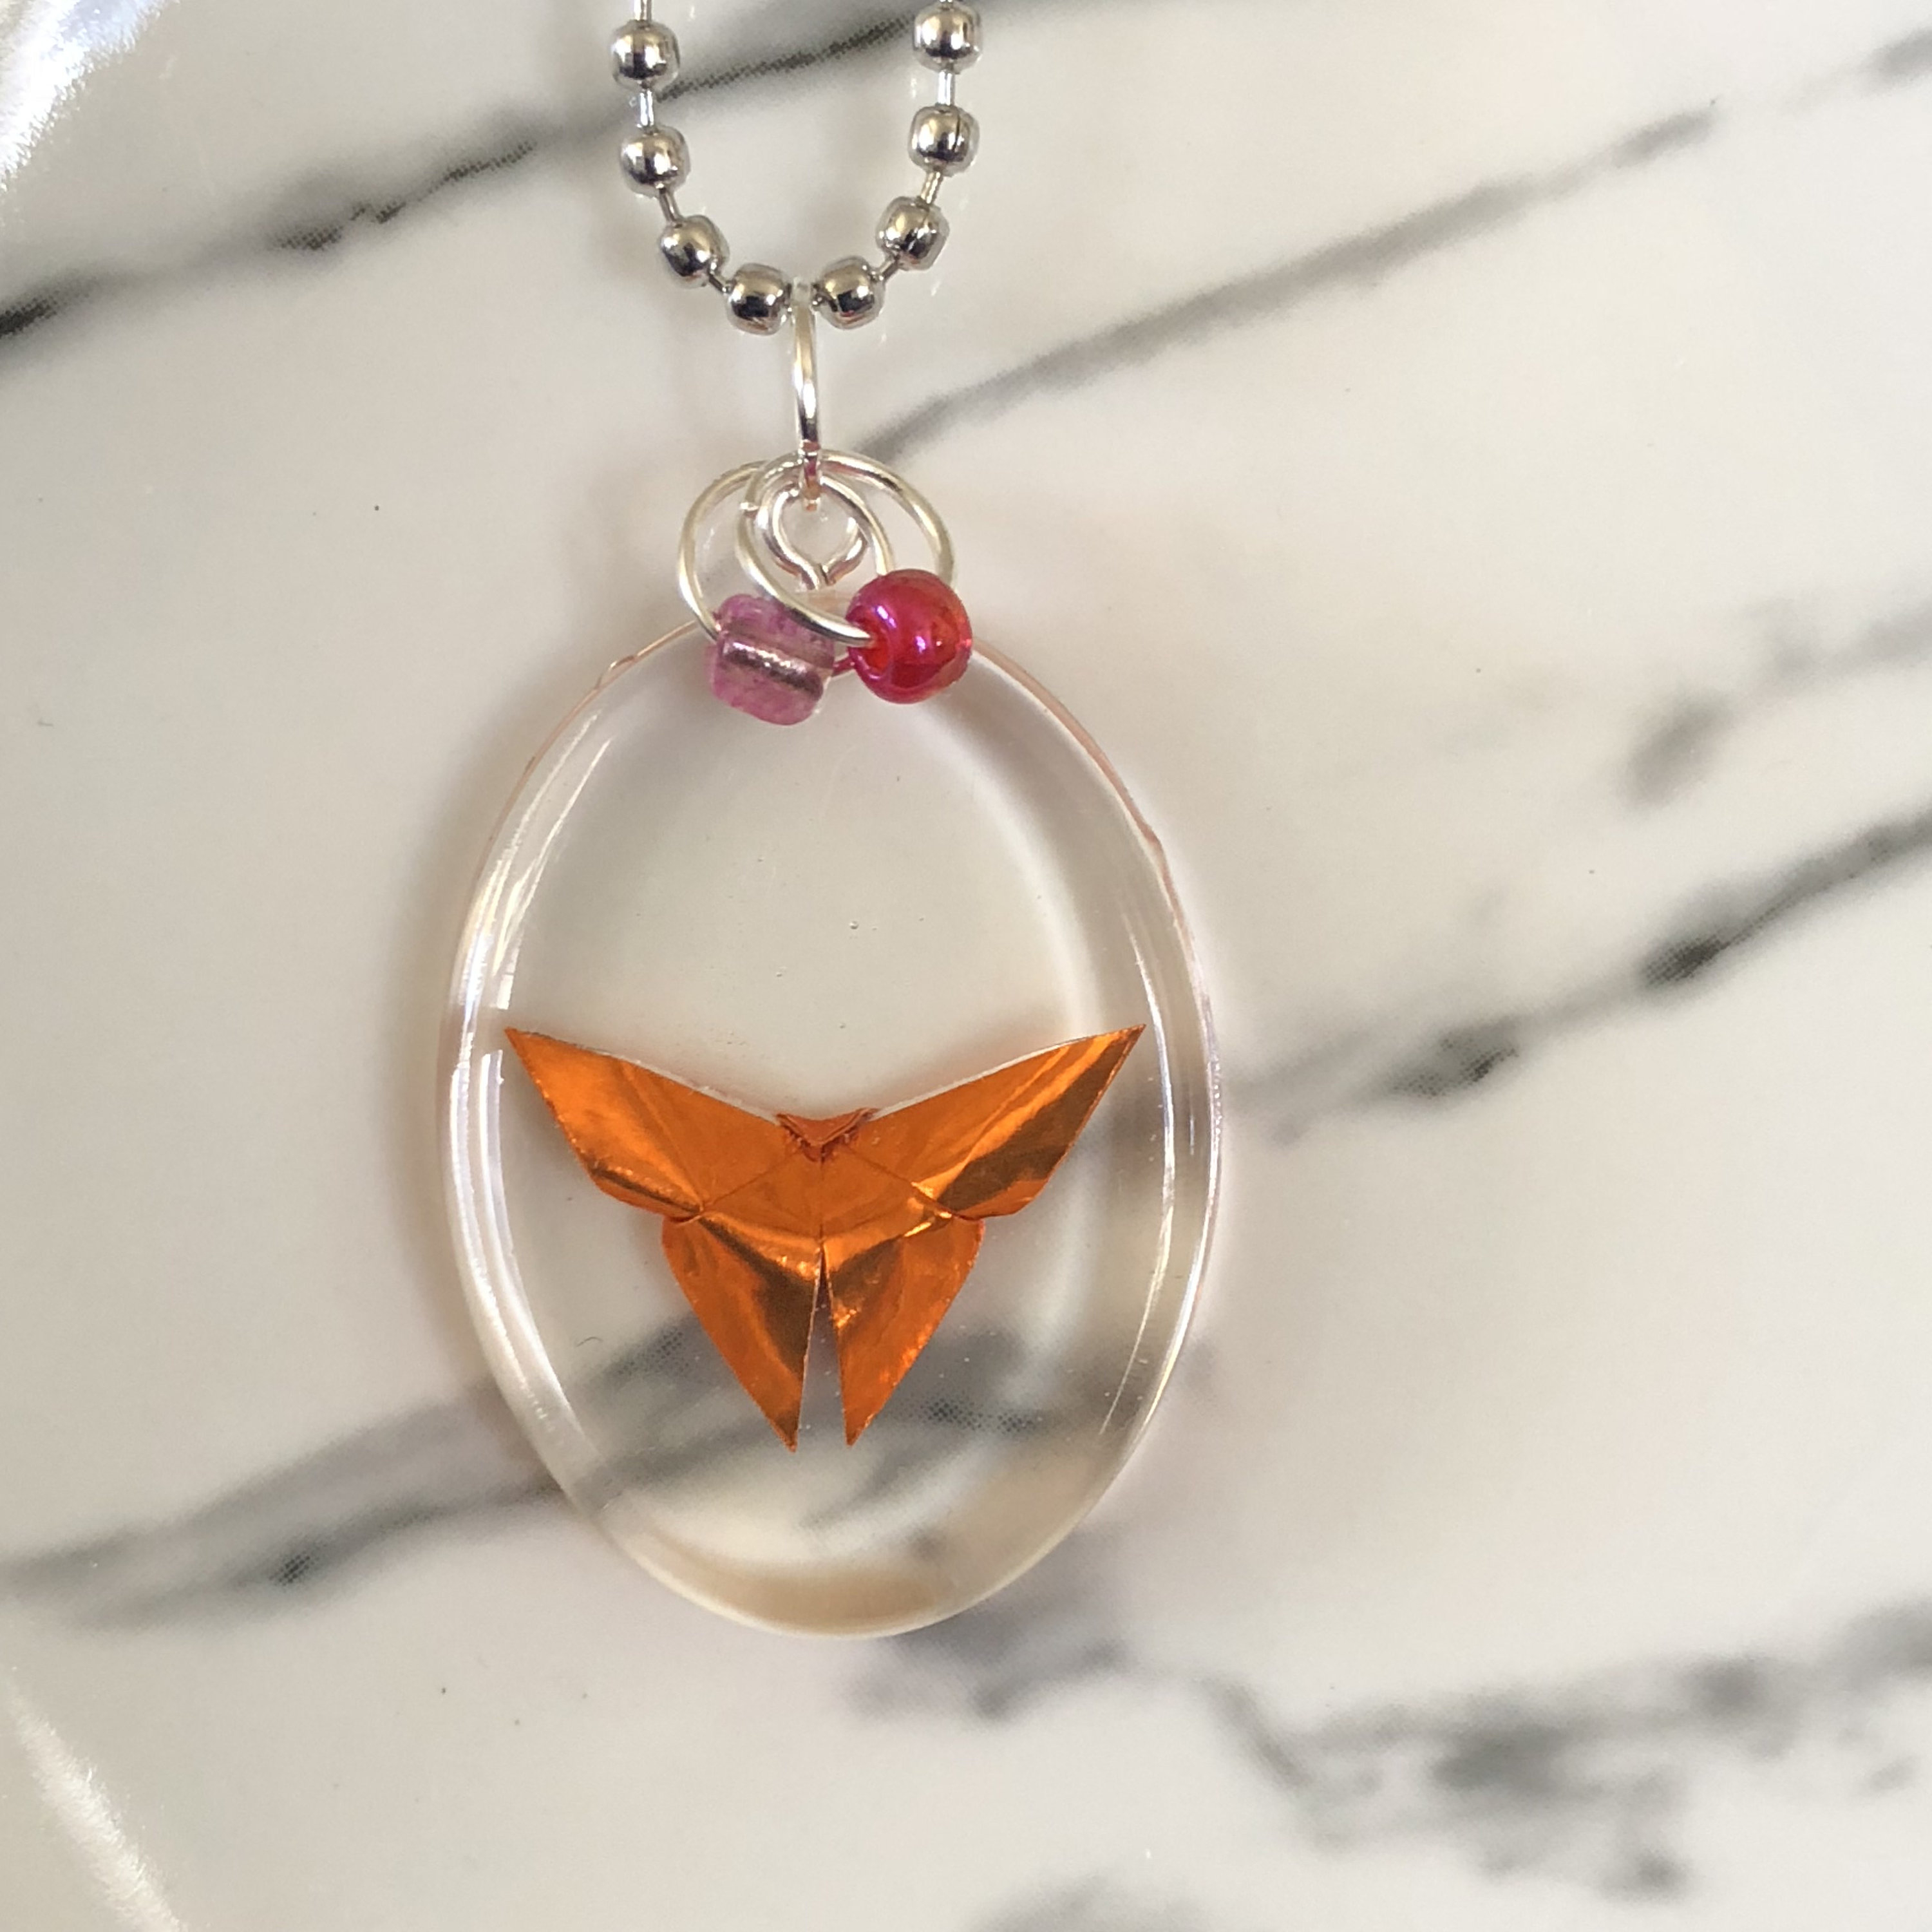 How To Fold Origami Butterfly Butterfly Origami Necklace Copper In Clear Resin Oval Orange Paper Fold Glass Cute Mini Pretty Handmade Original Gift Mom Her Jewelry